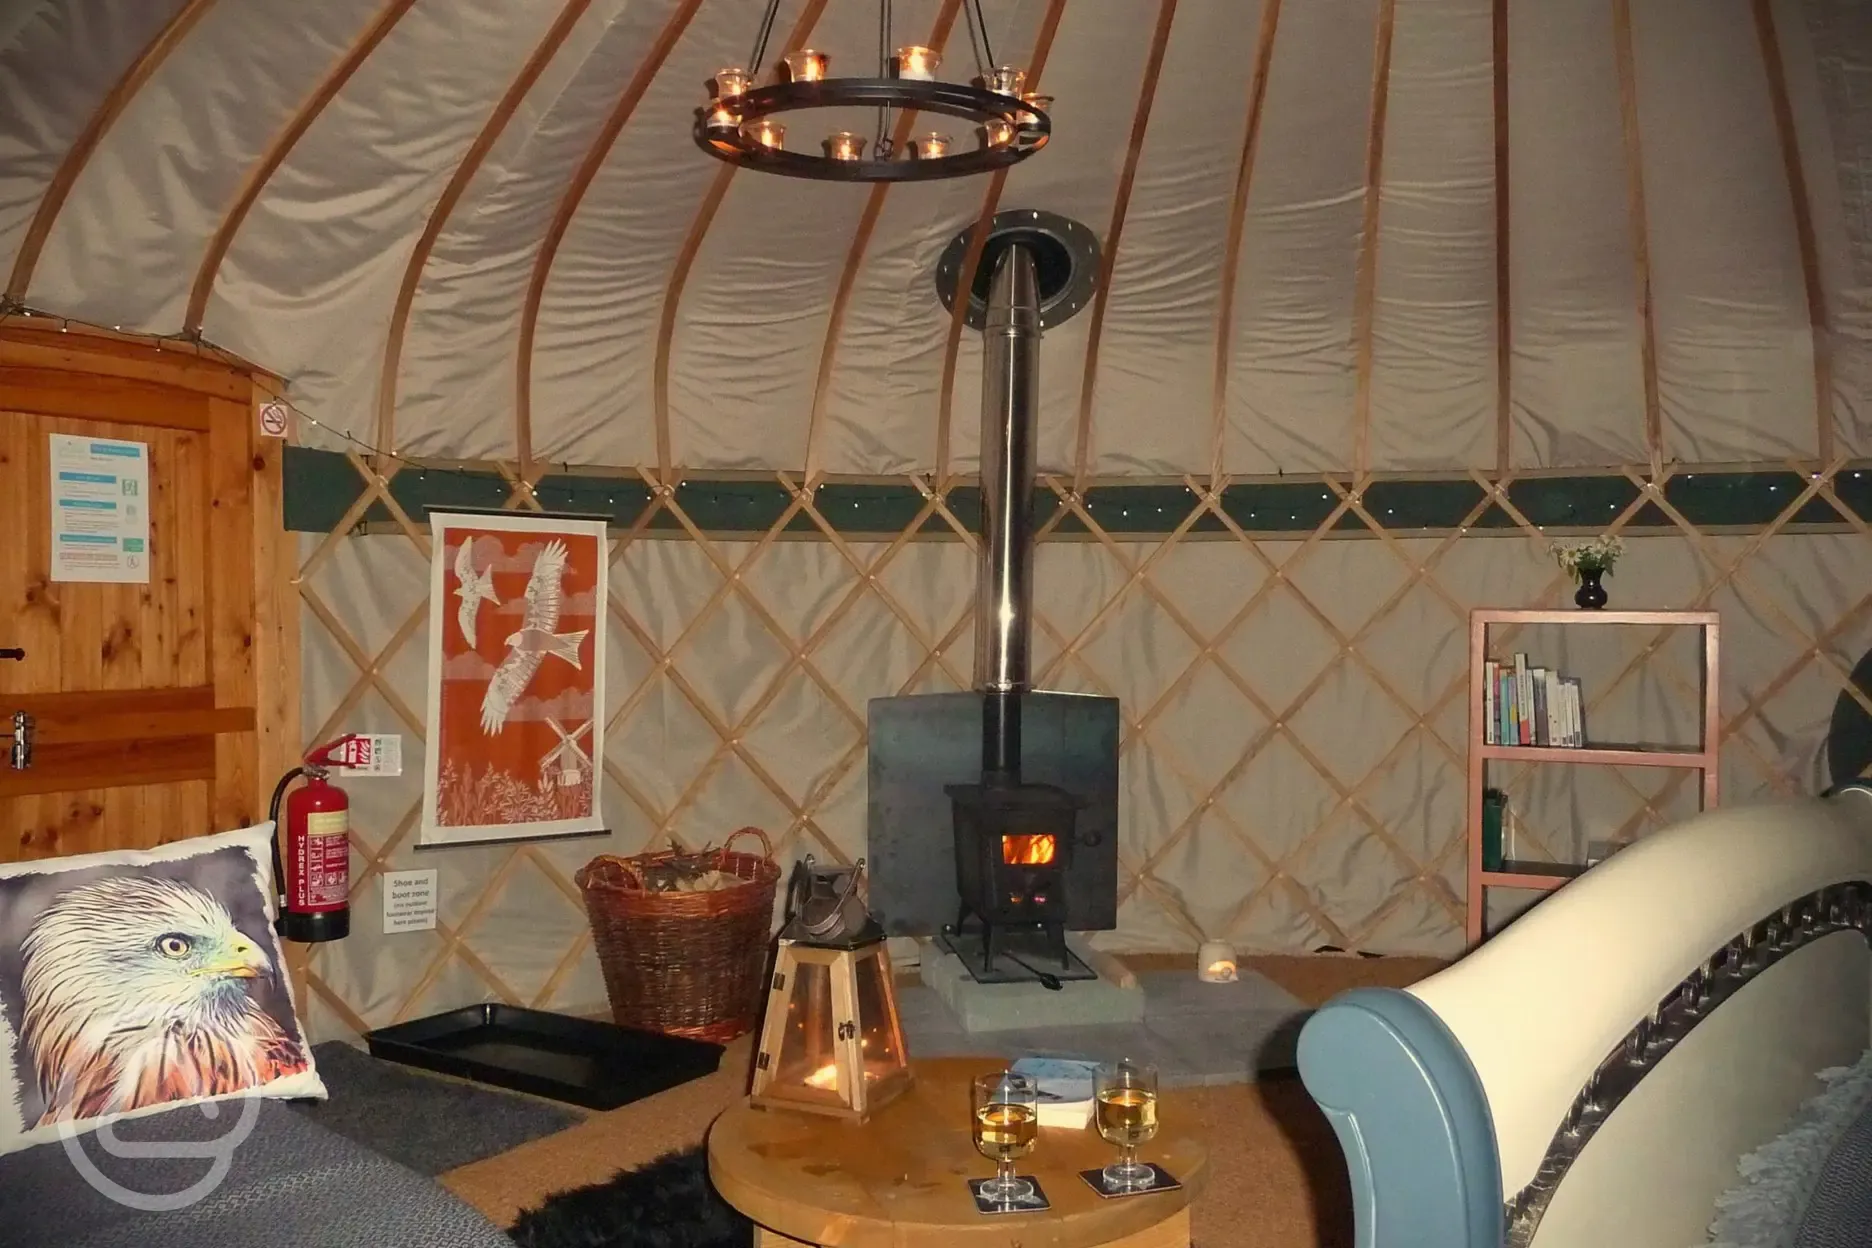 Stay cosy in your yurt around the wood-burner